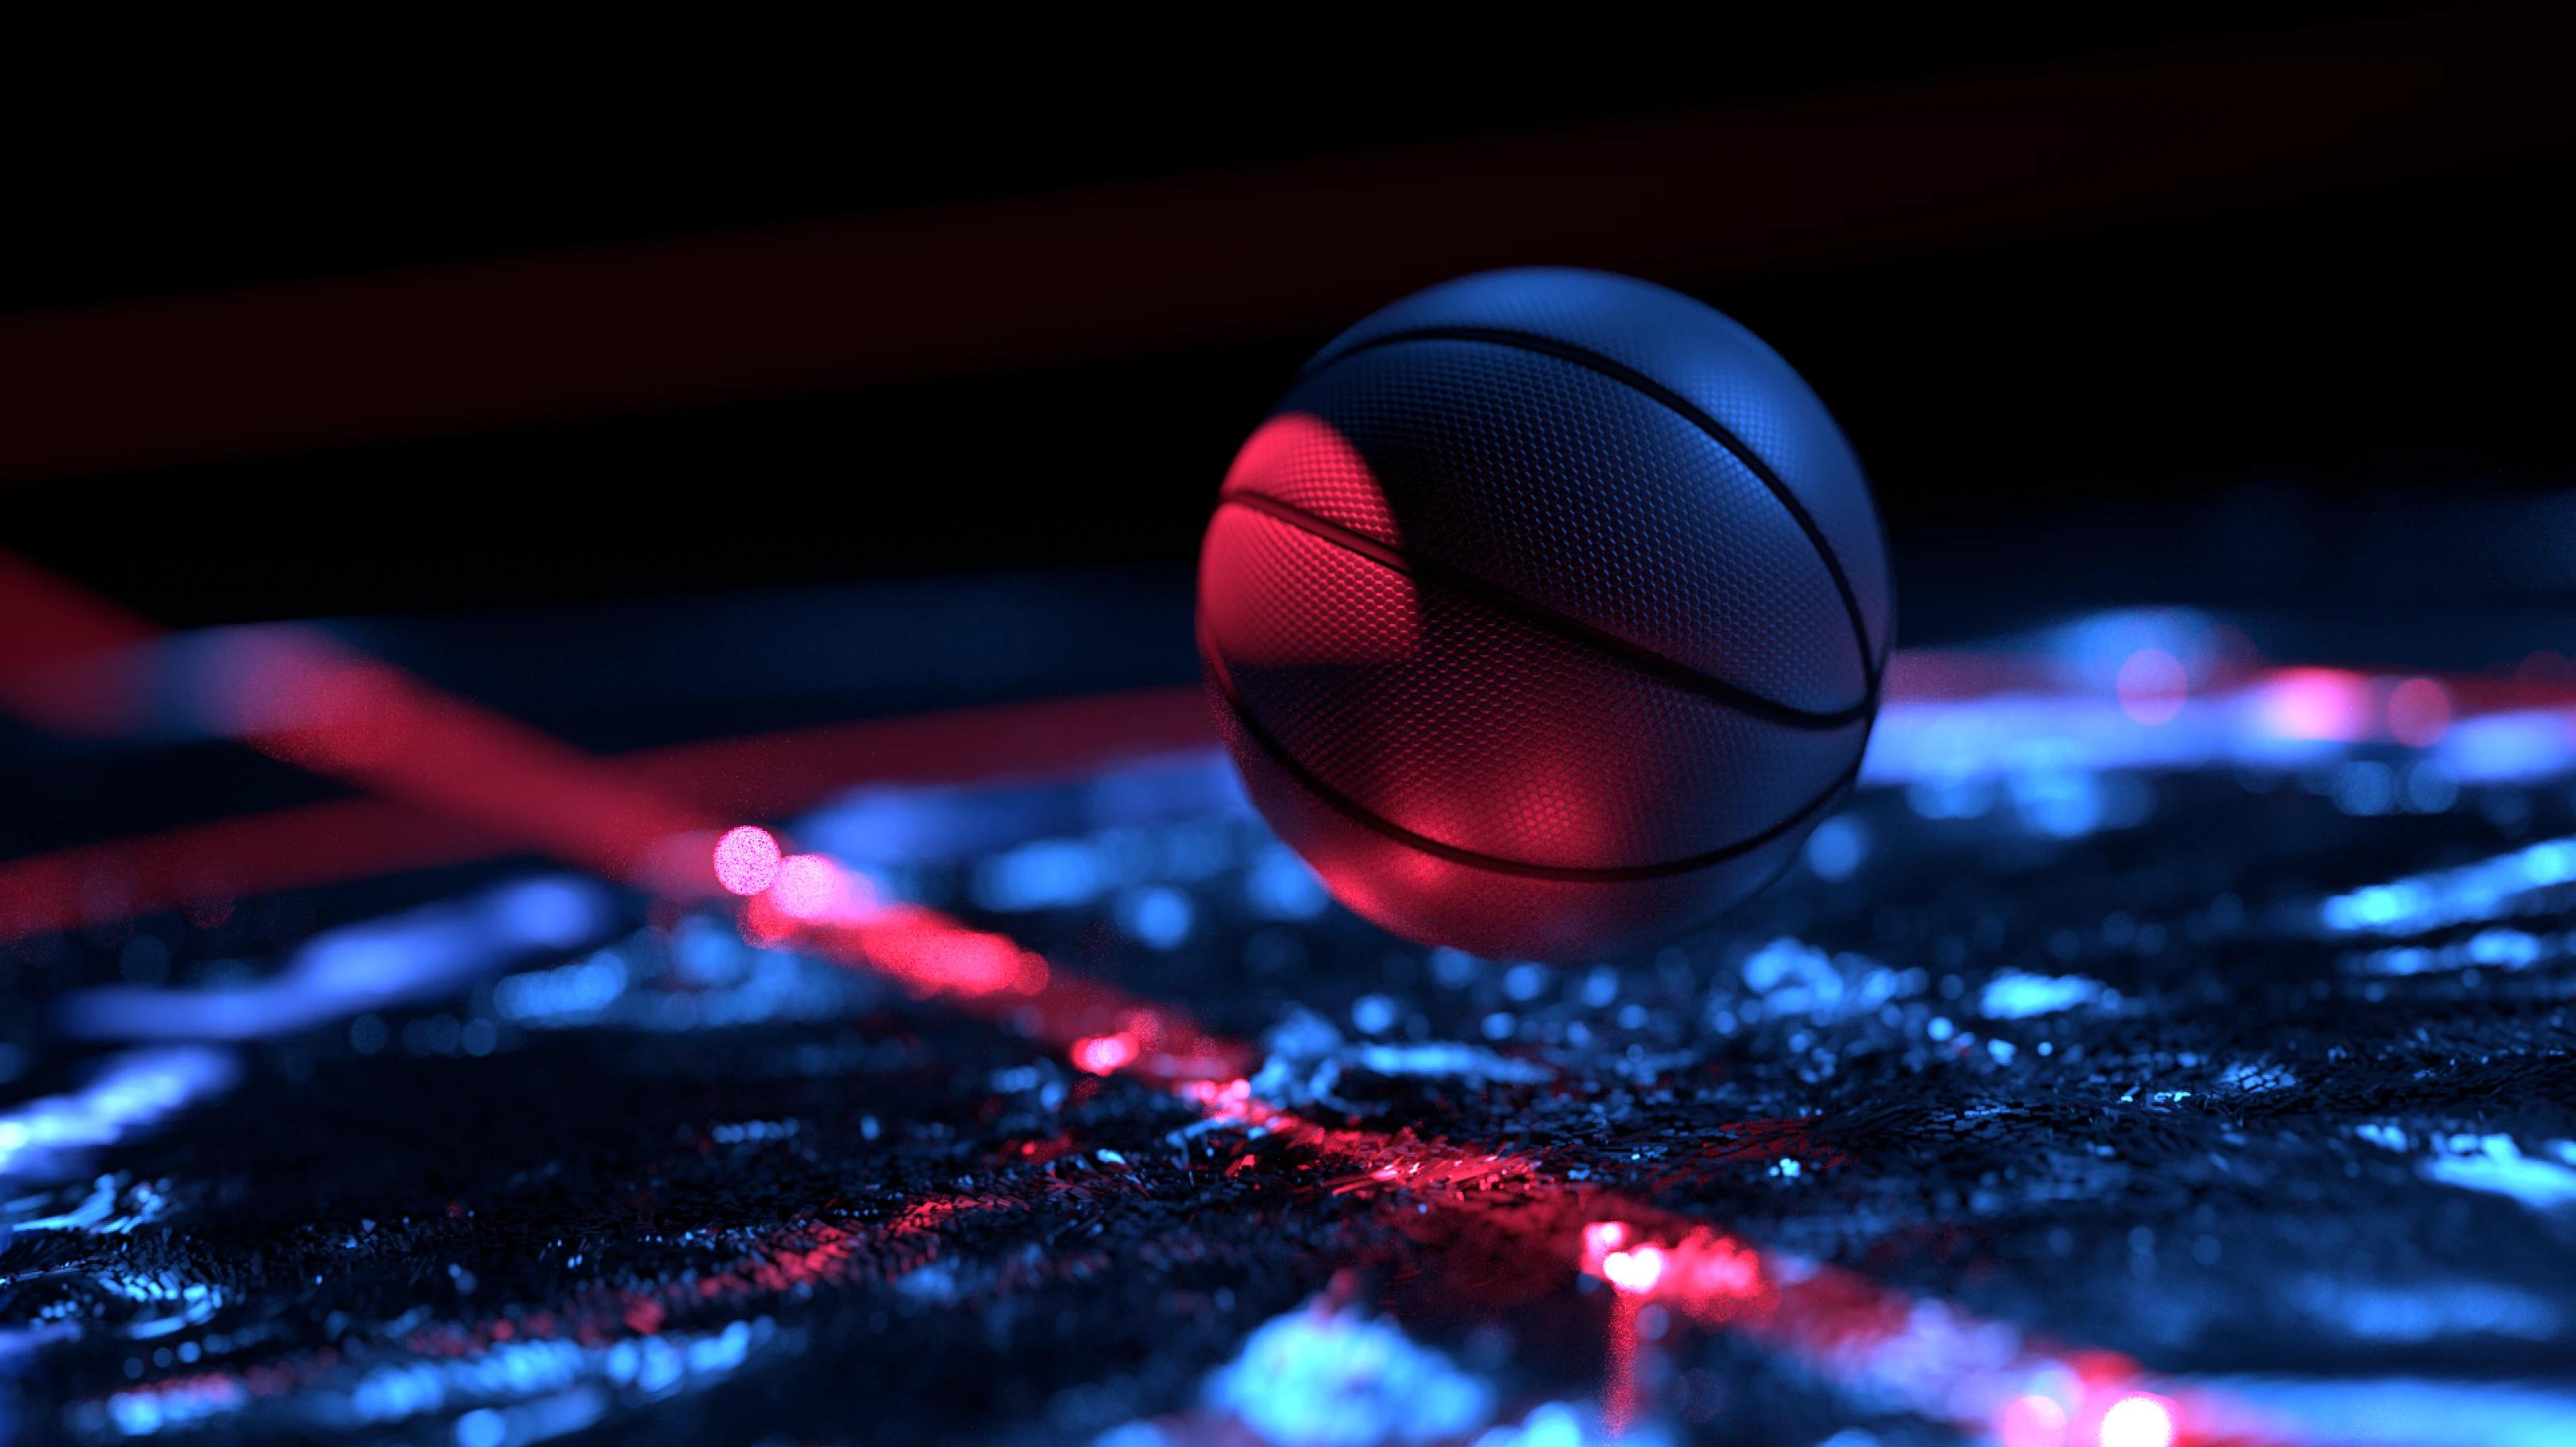 Styleframe of a basketball bouncing into a glowing field of paarticles on a court